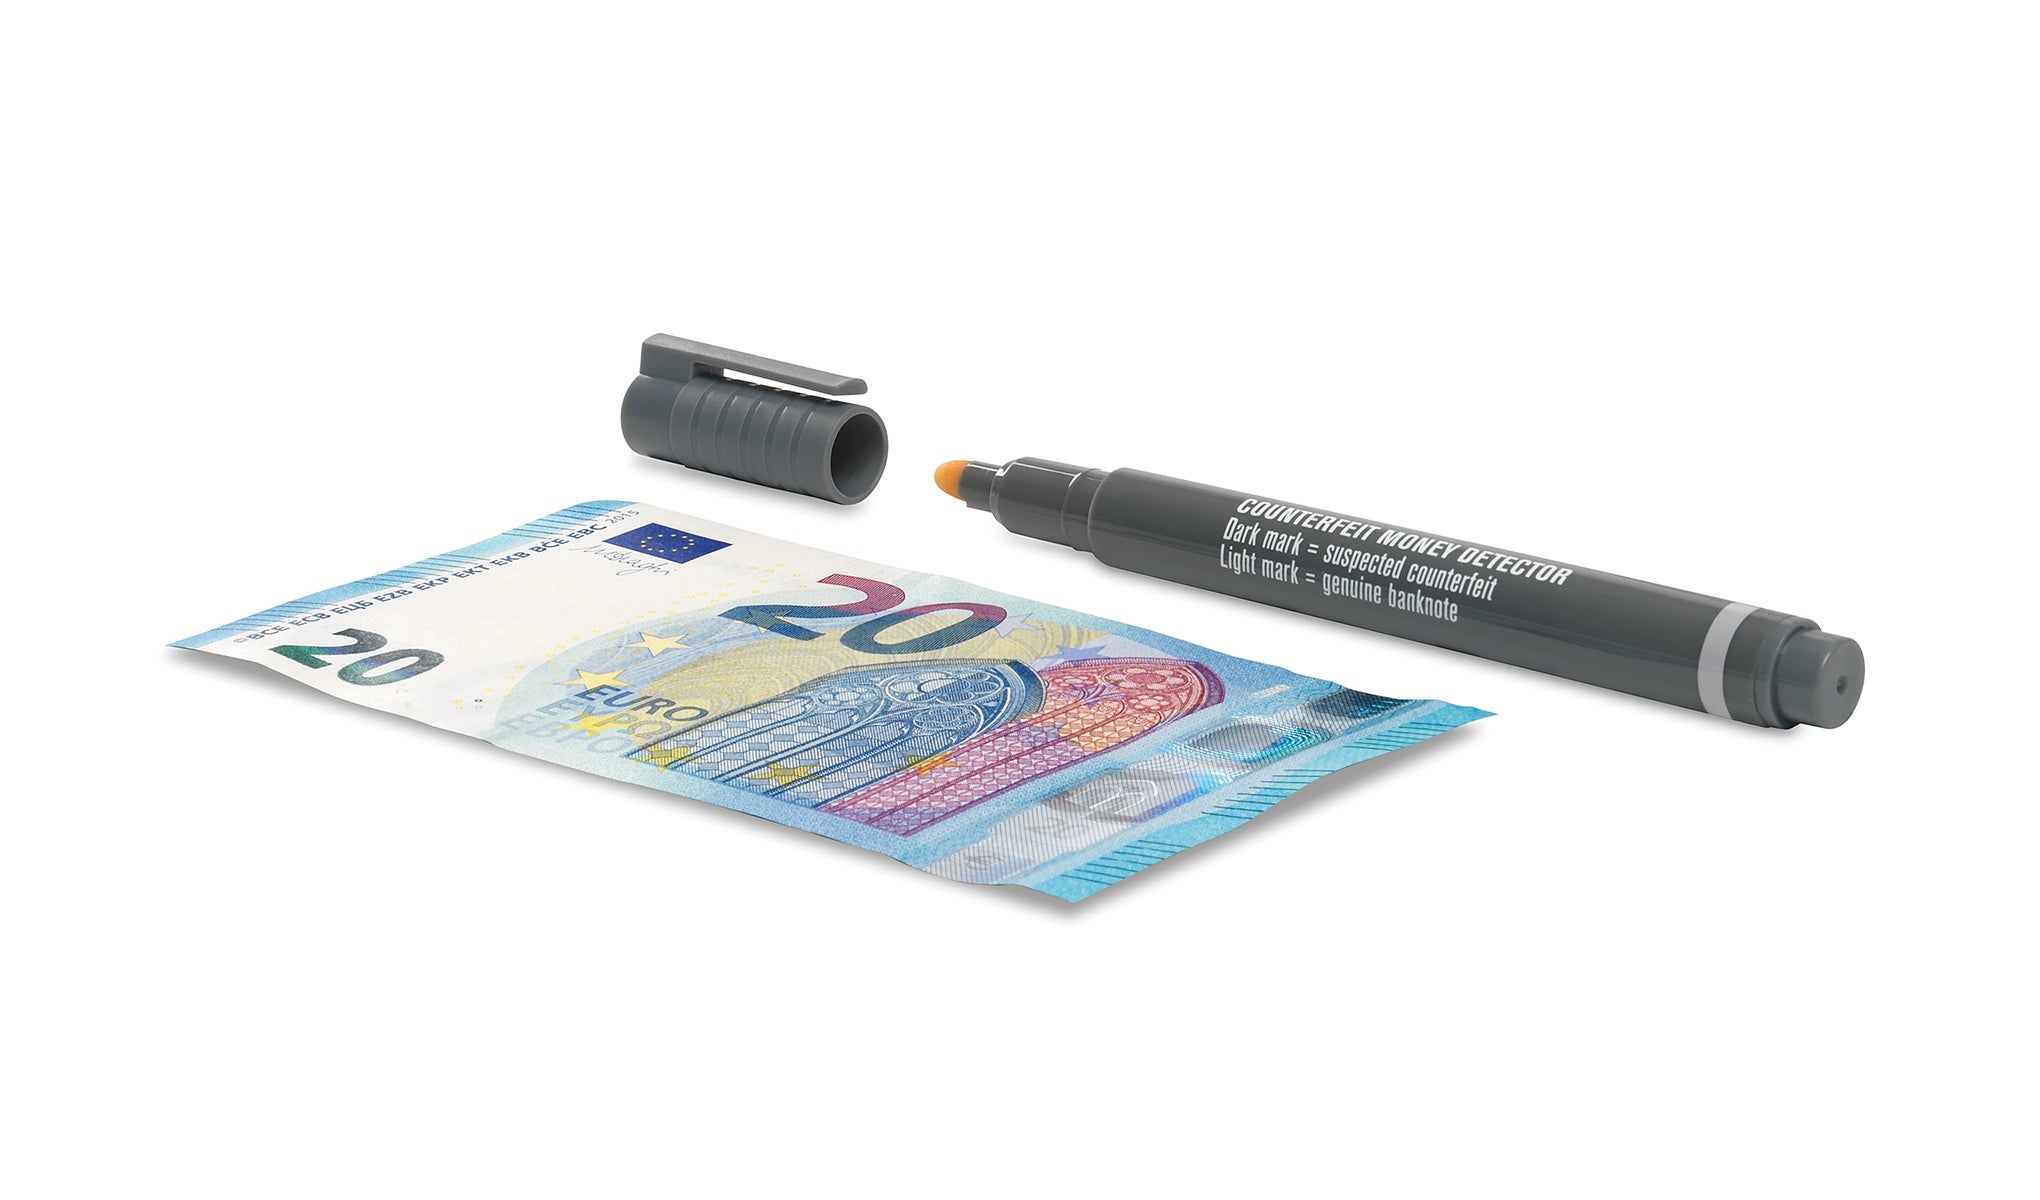 Compare prices for Euro Tester Pen across all European  stores